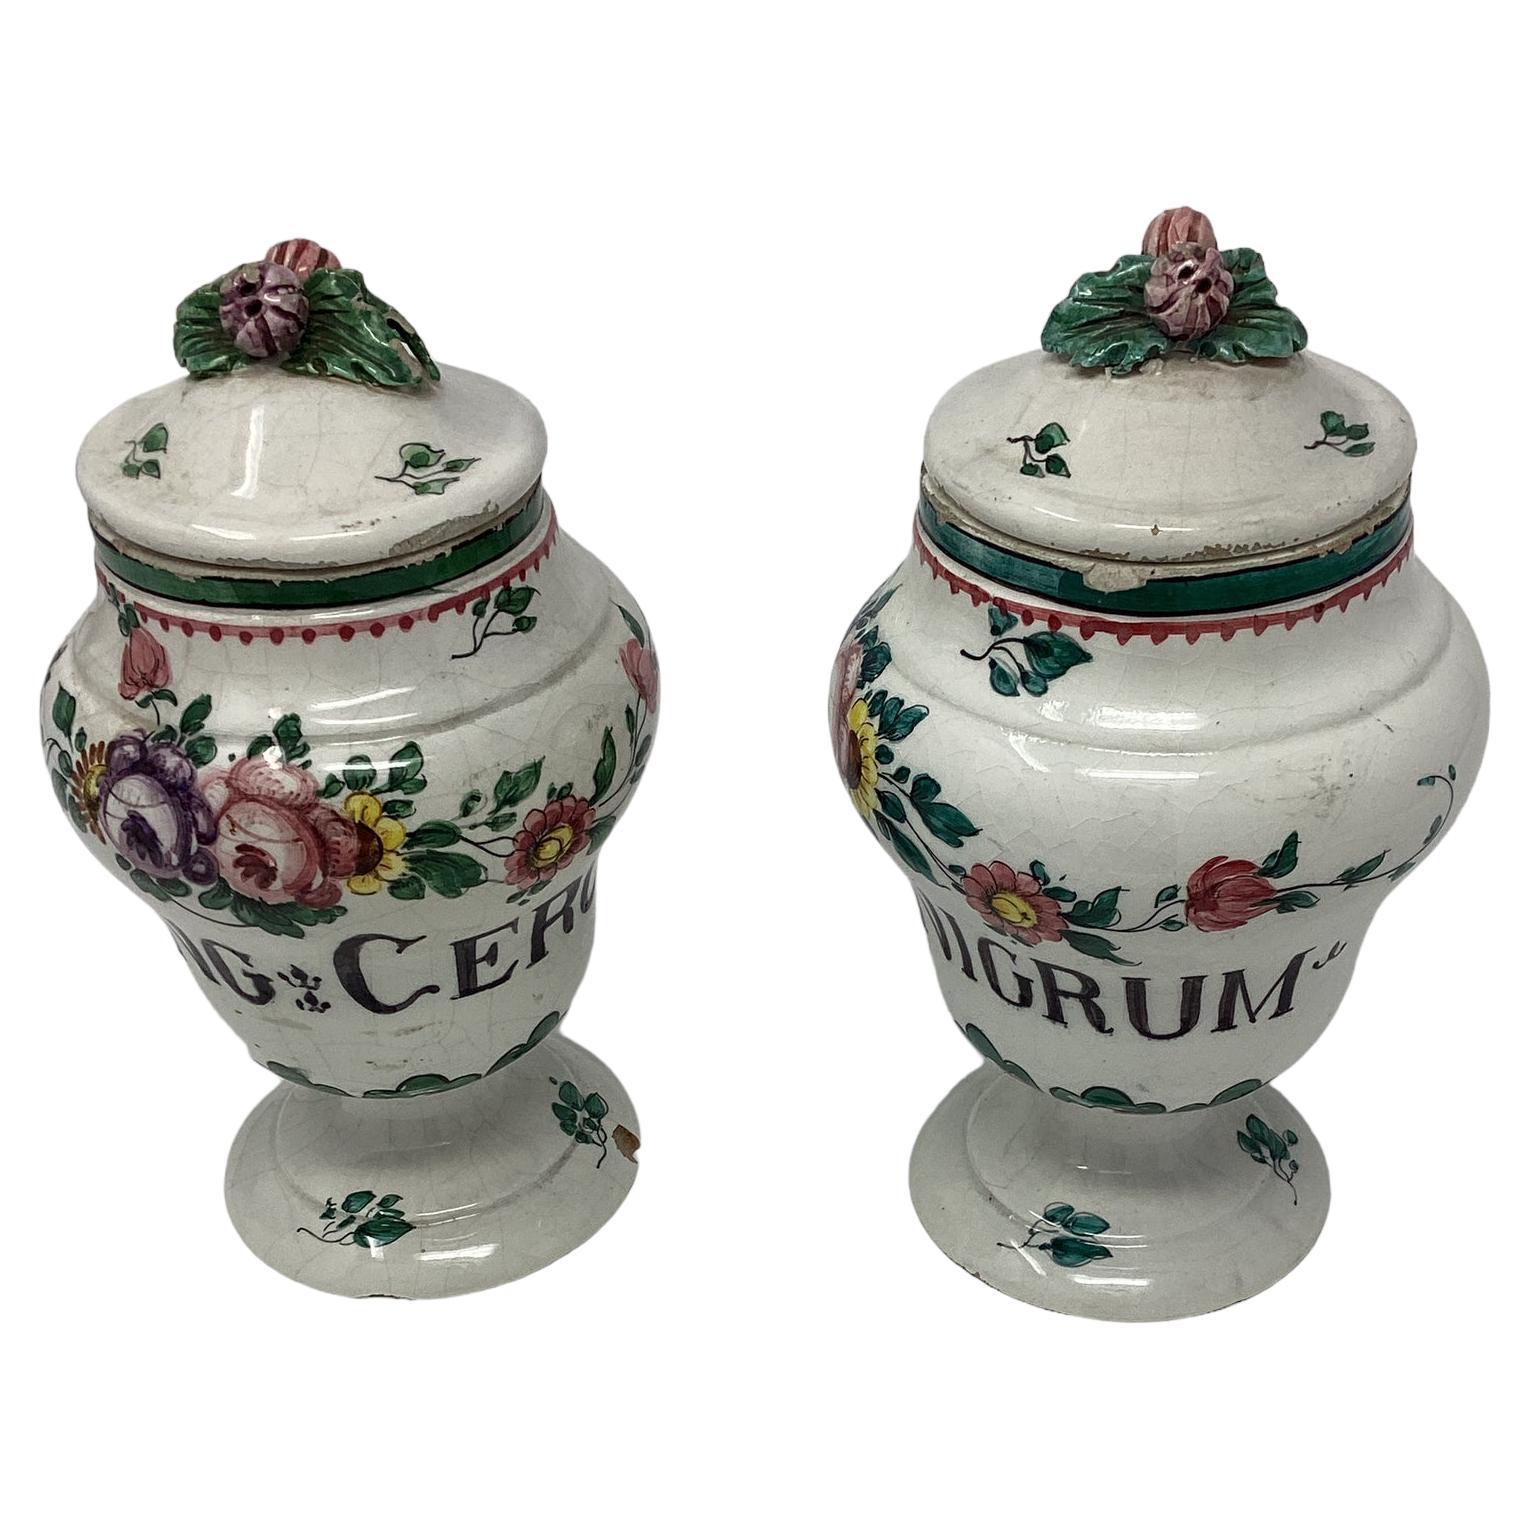 19th Century Italian Faience Floral Decorated Apothecary Jars